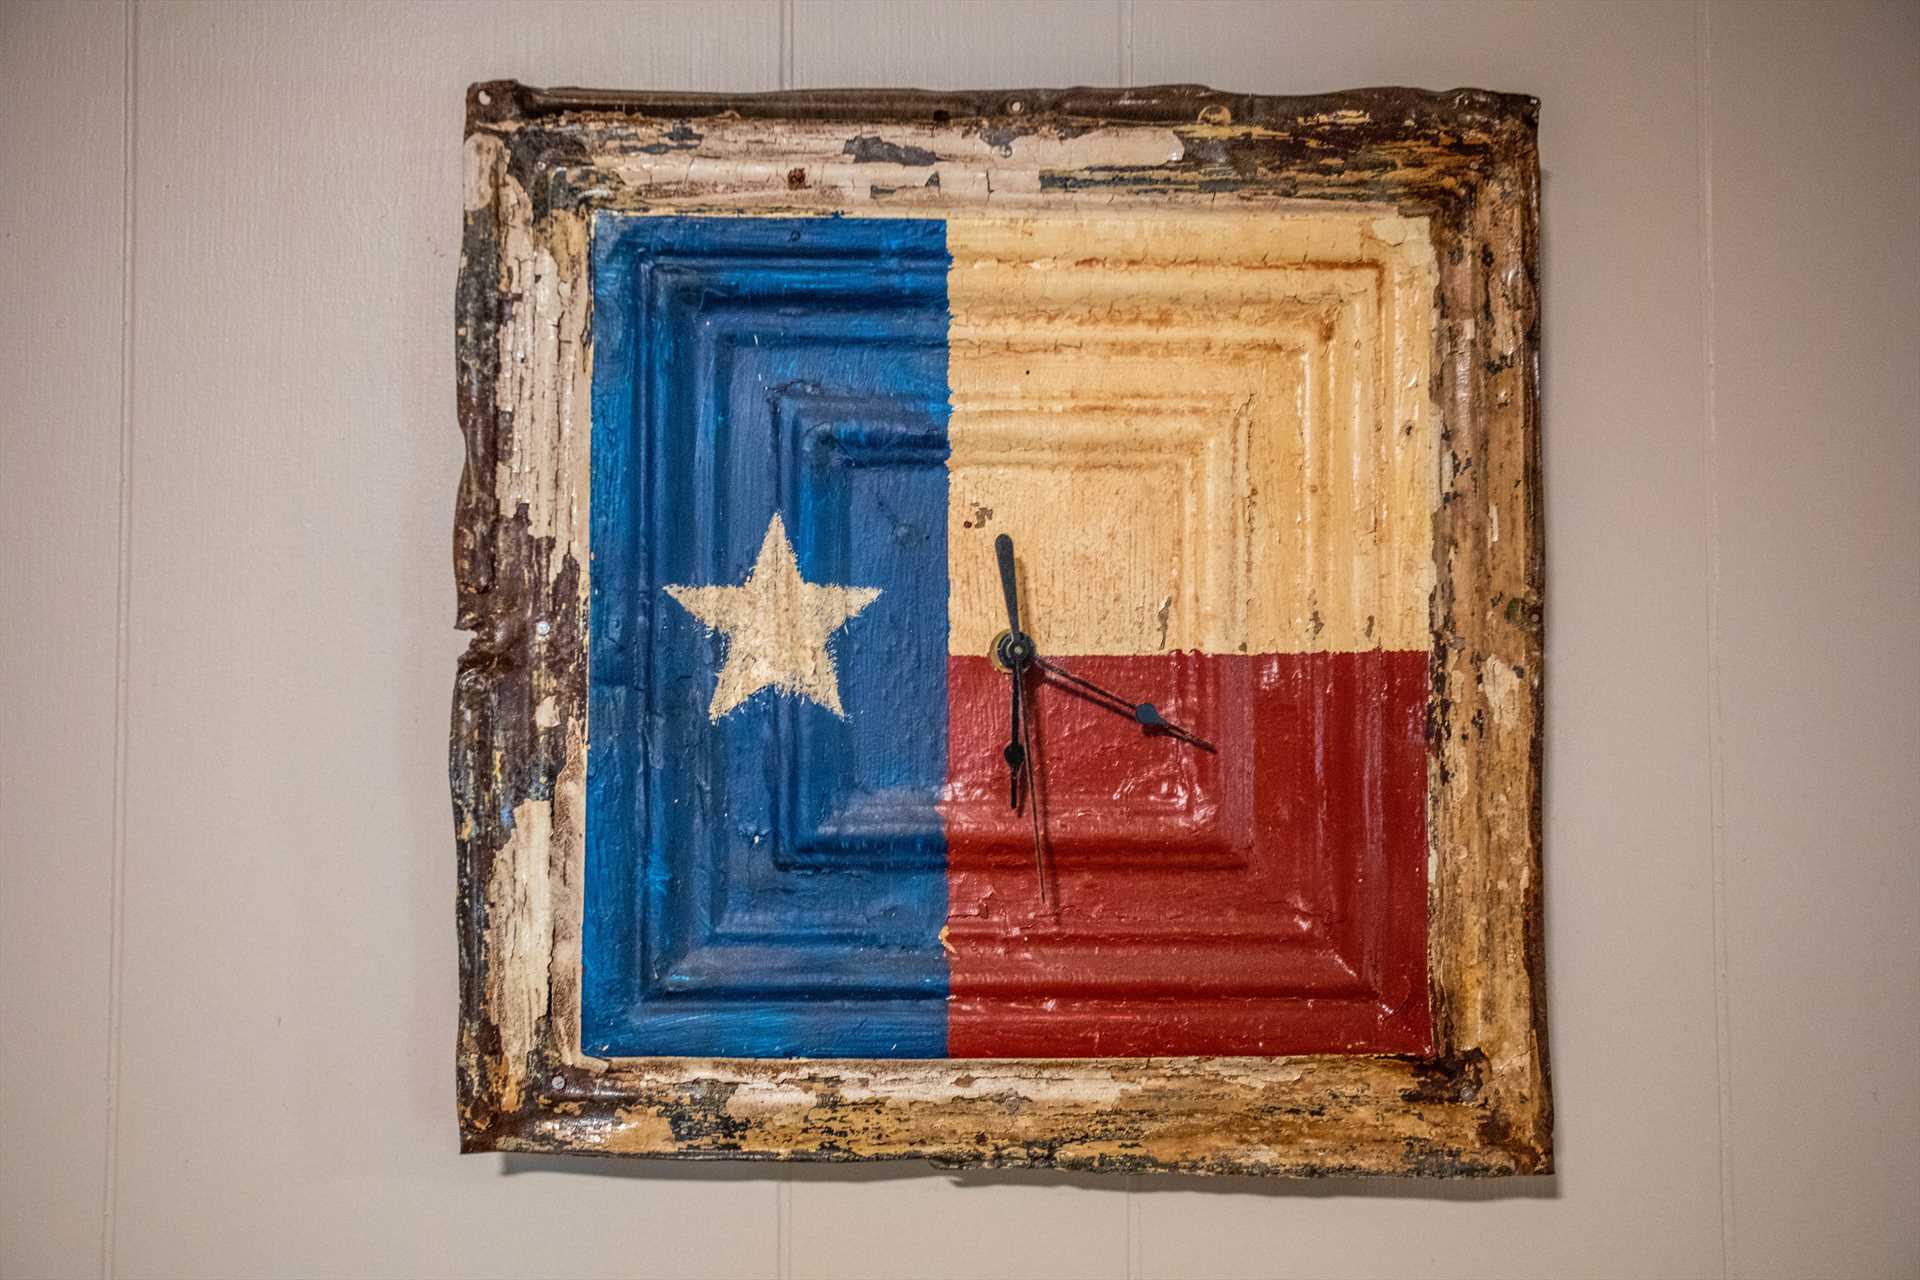                                                 We here in the Hill Country are proud to be part of the Lone Star State...and we love to show off for our visitors, too!